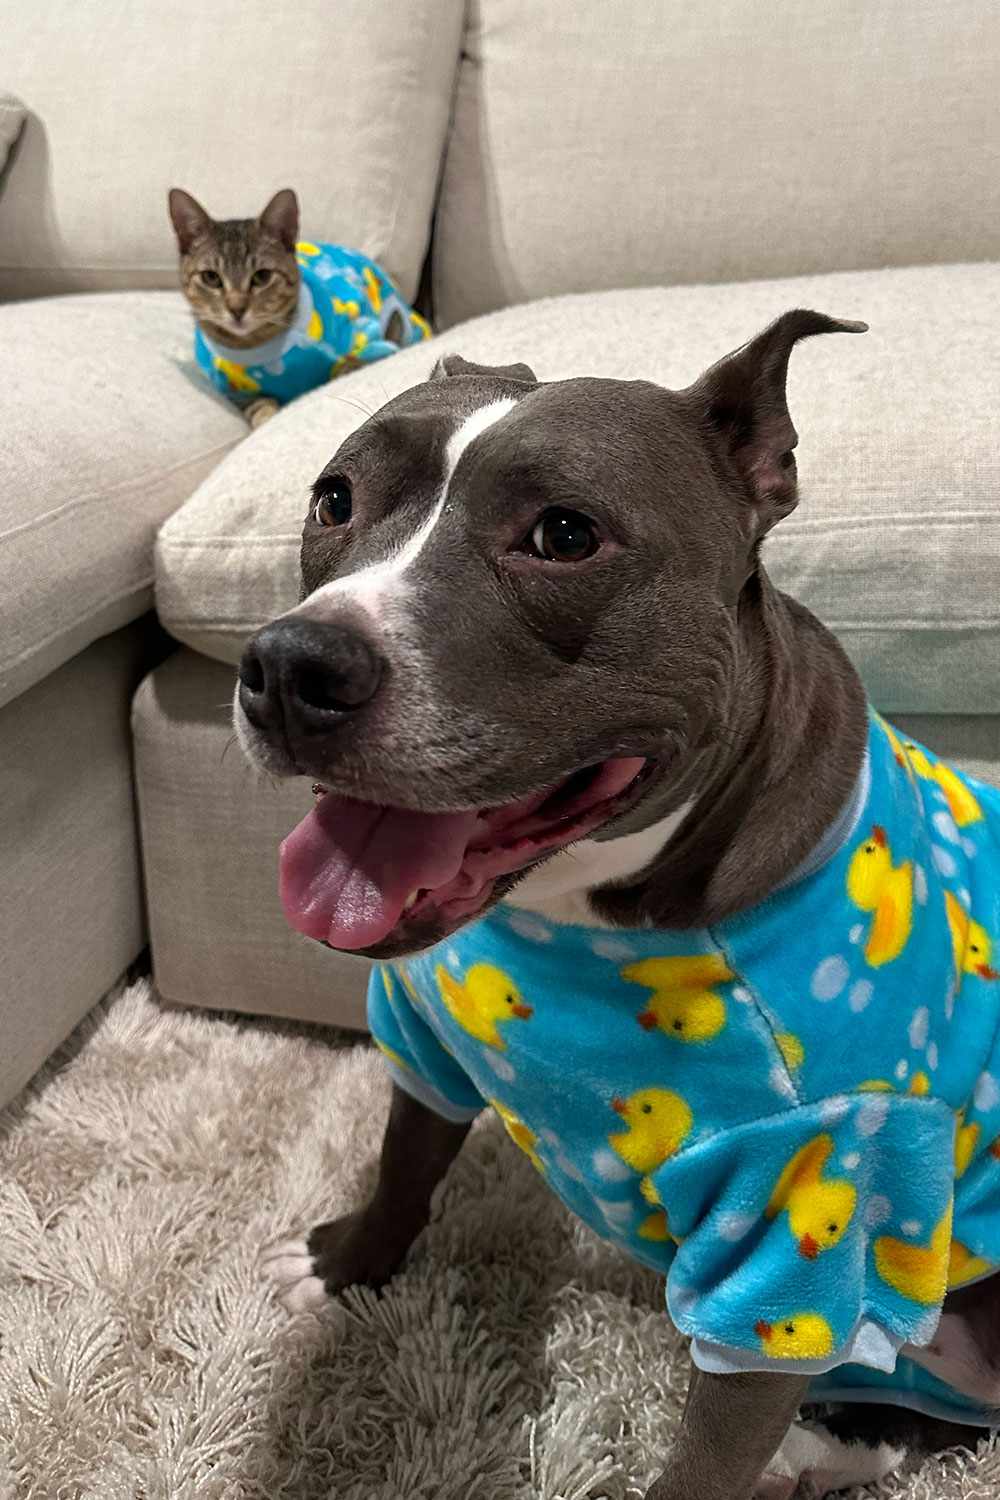 Bella the Pit Bull and Lulu the Tabby Cat Have A Unlikely Friendship